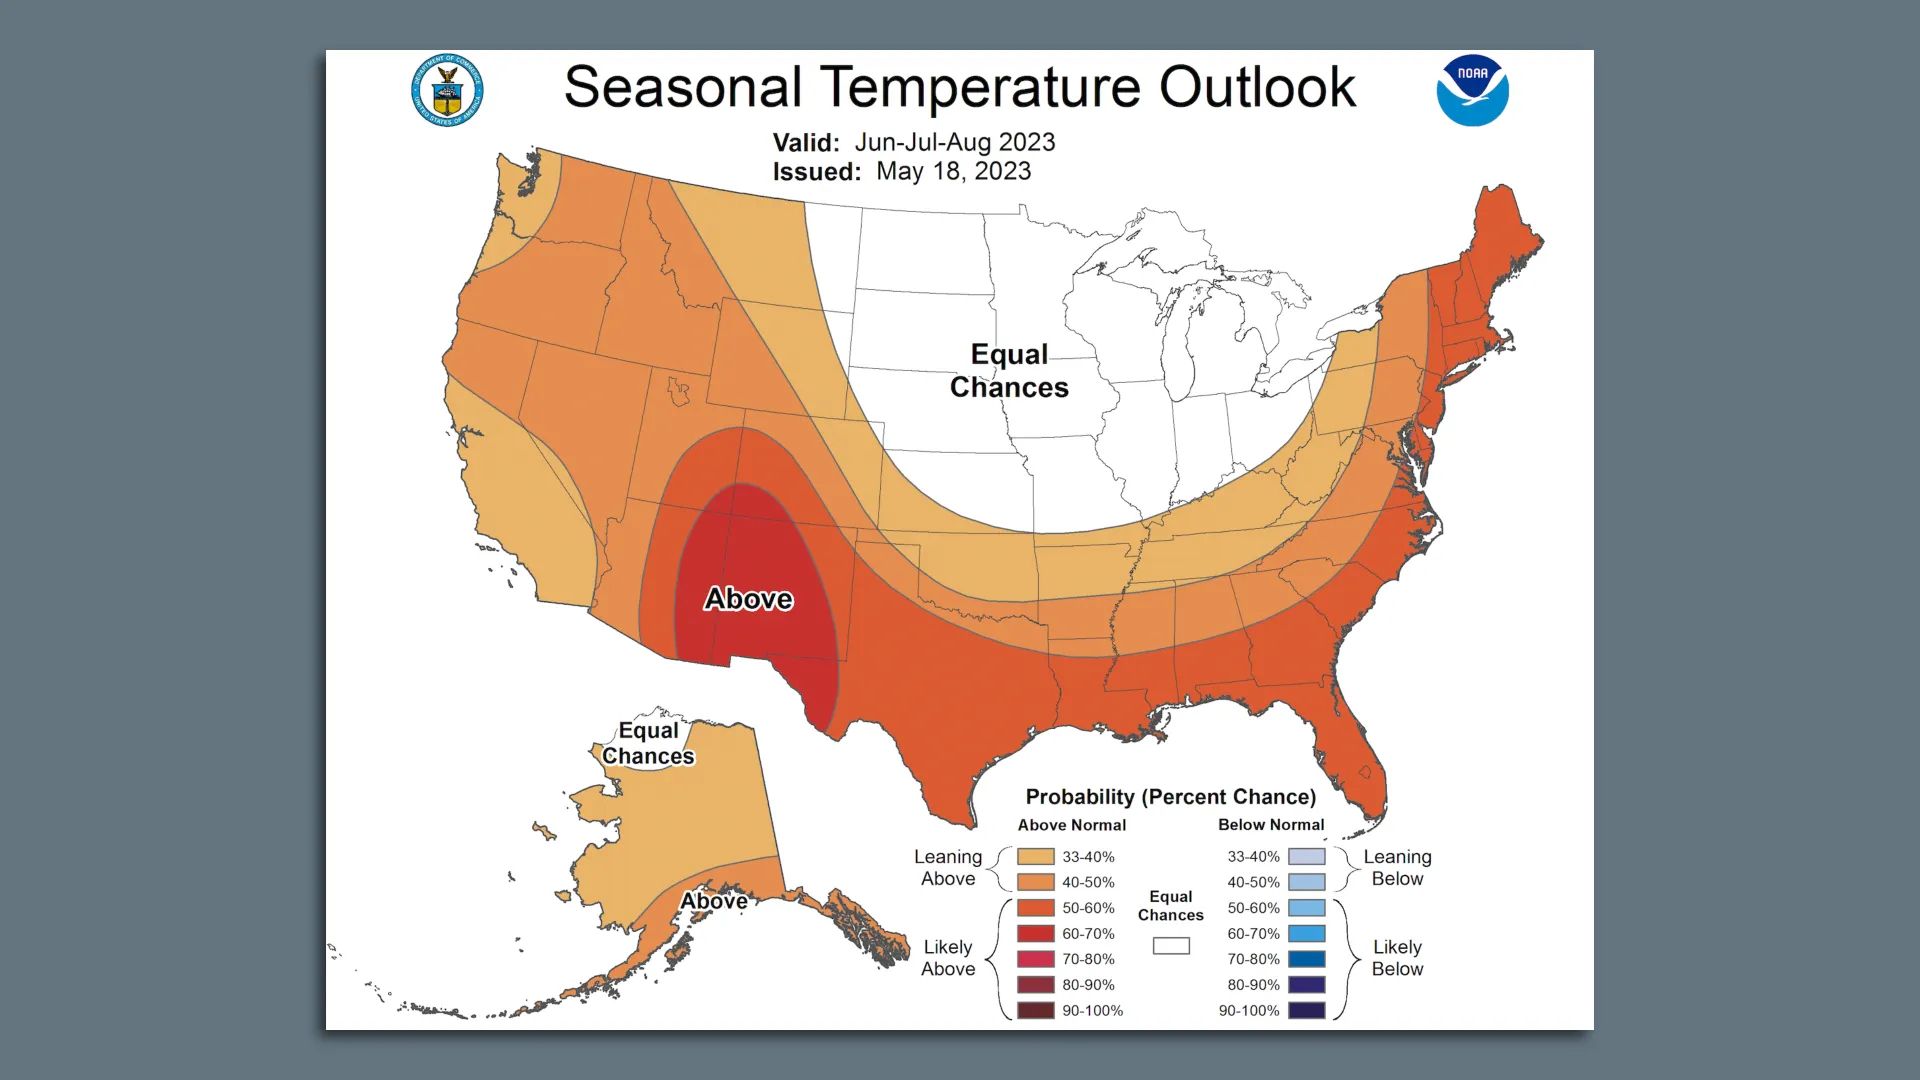 Map showing seasonal temperature trends likely during summer 2023 across the U.S.